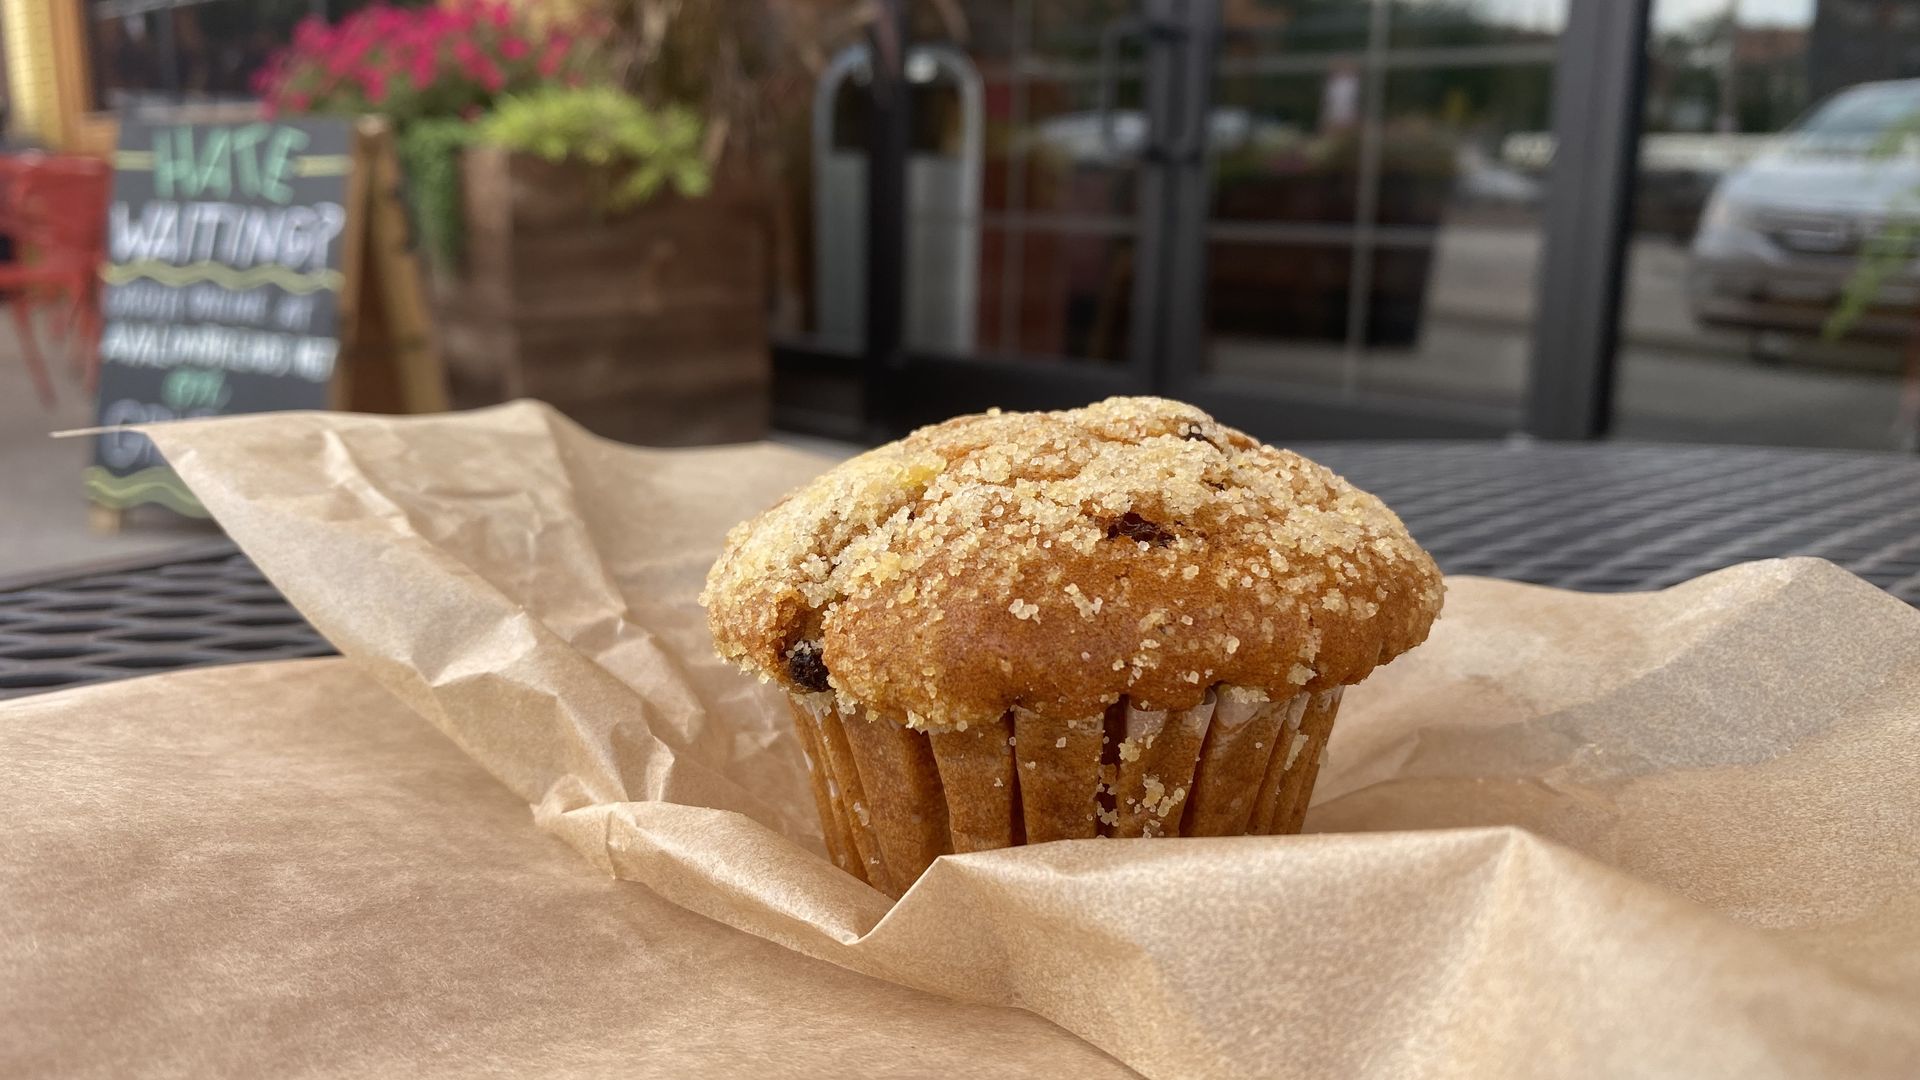 A pumpkin muffin with raisins sits on an outdoor table.